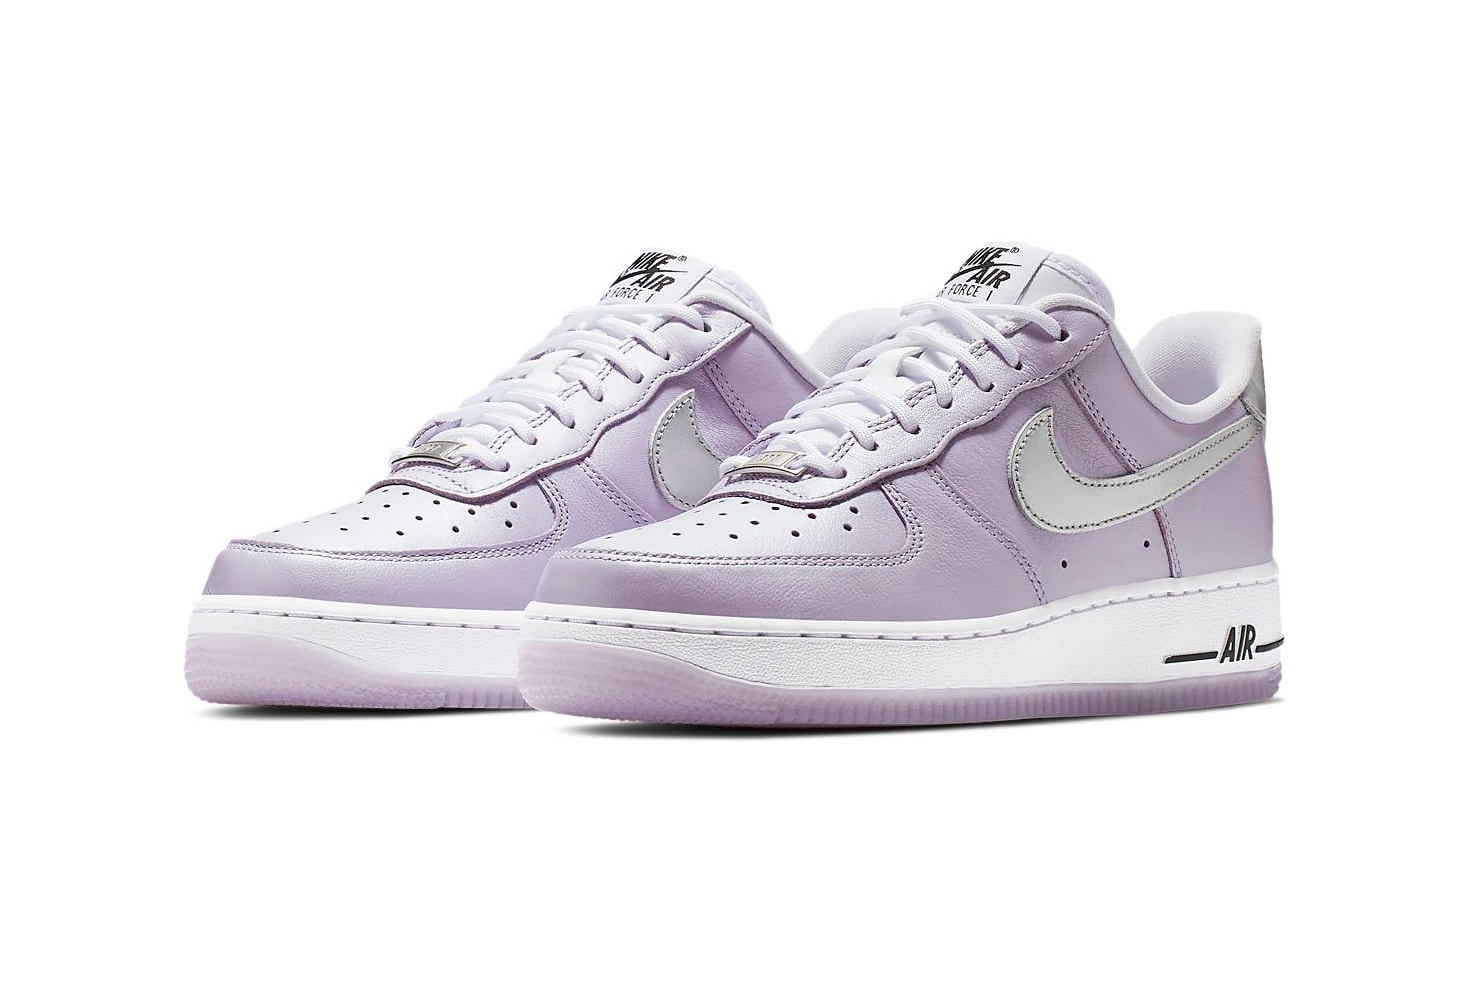 Nike Air Force 1 Metallic Lilac Silver Oxygen Purple Sneakers Trainers